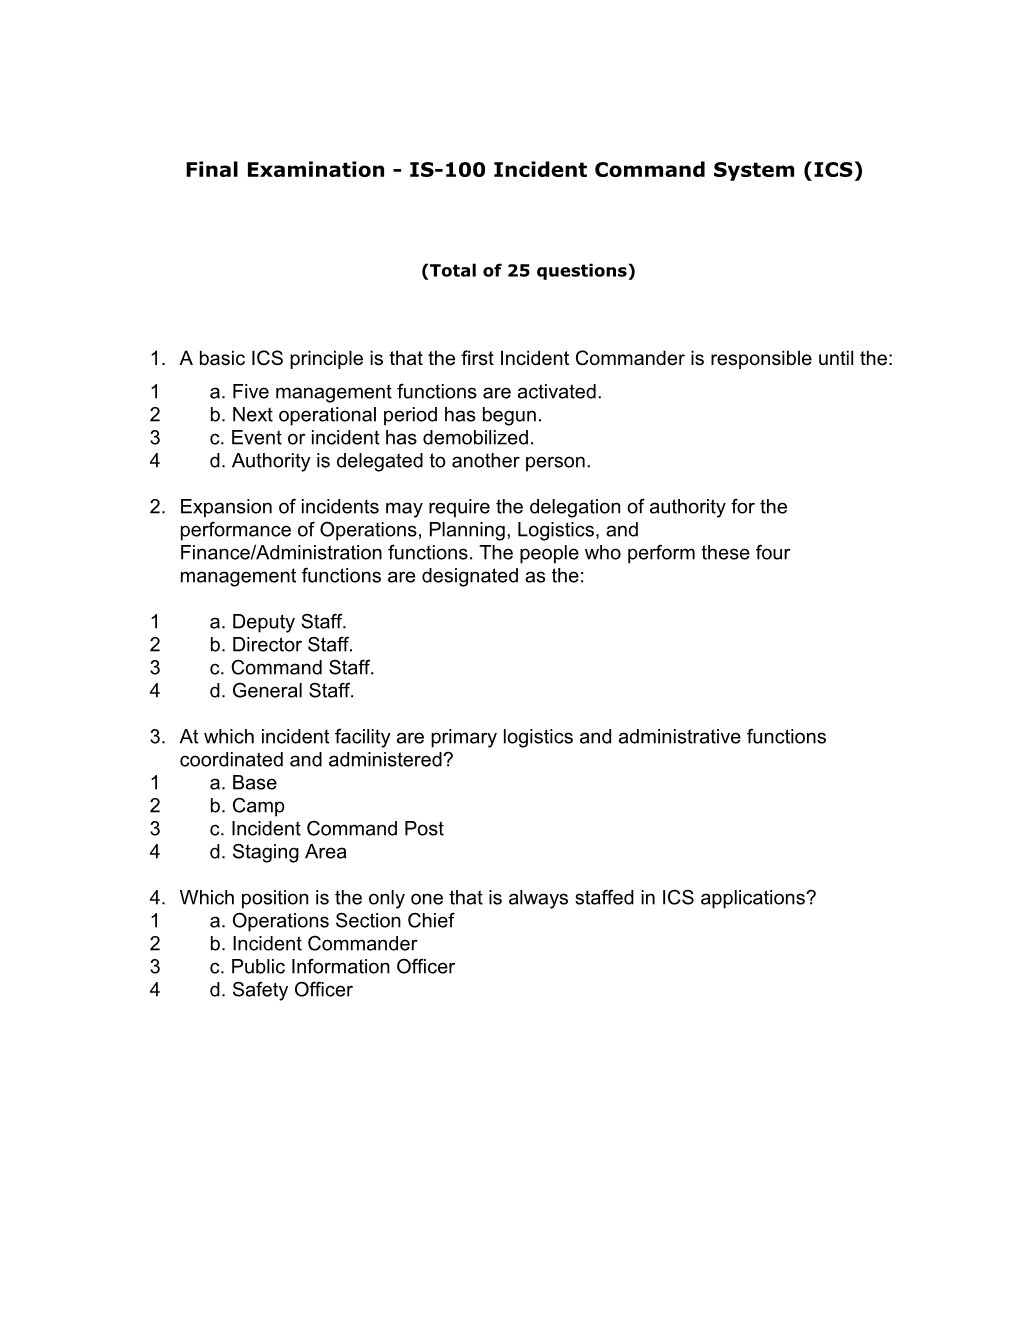 Final Examination - IS-100 Incident Command System (ICS)